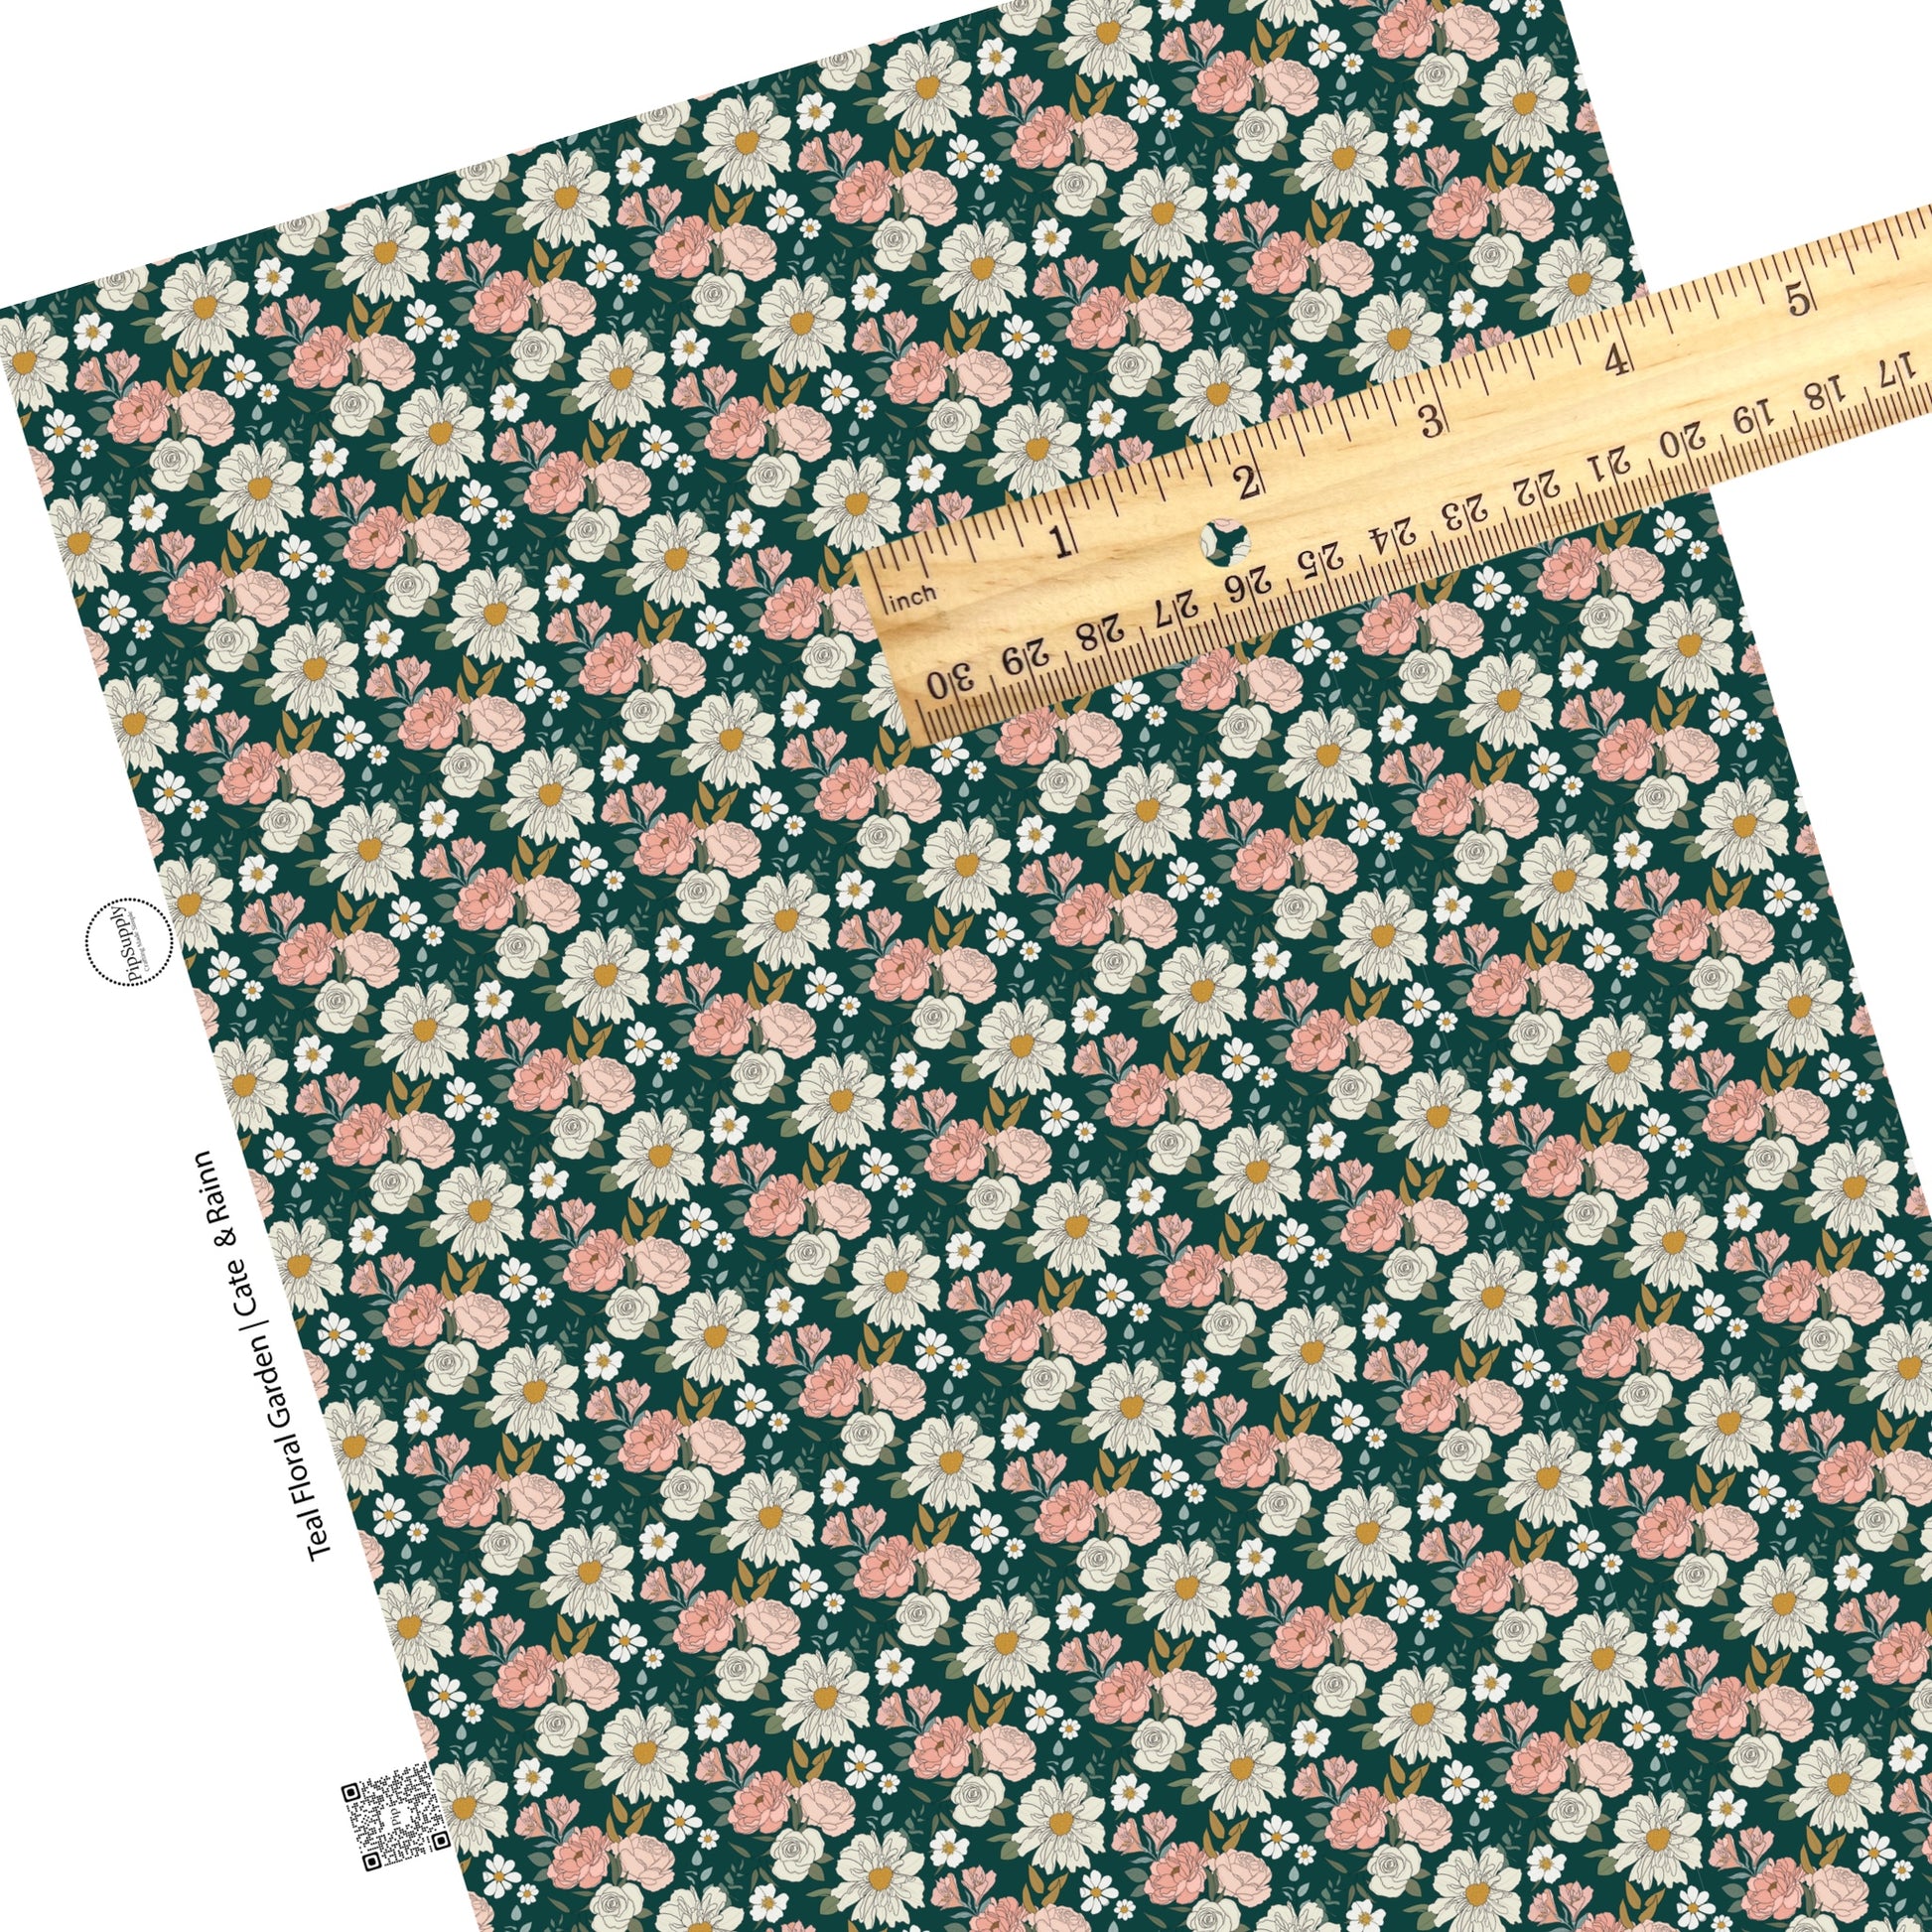 Pink and white roses, and daisy clusters on hunter green faux leather sheet.